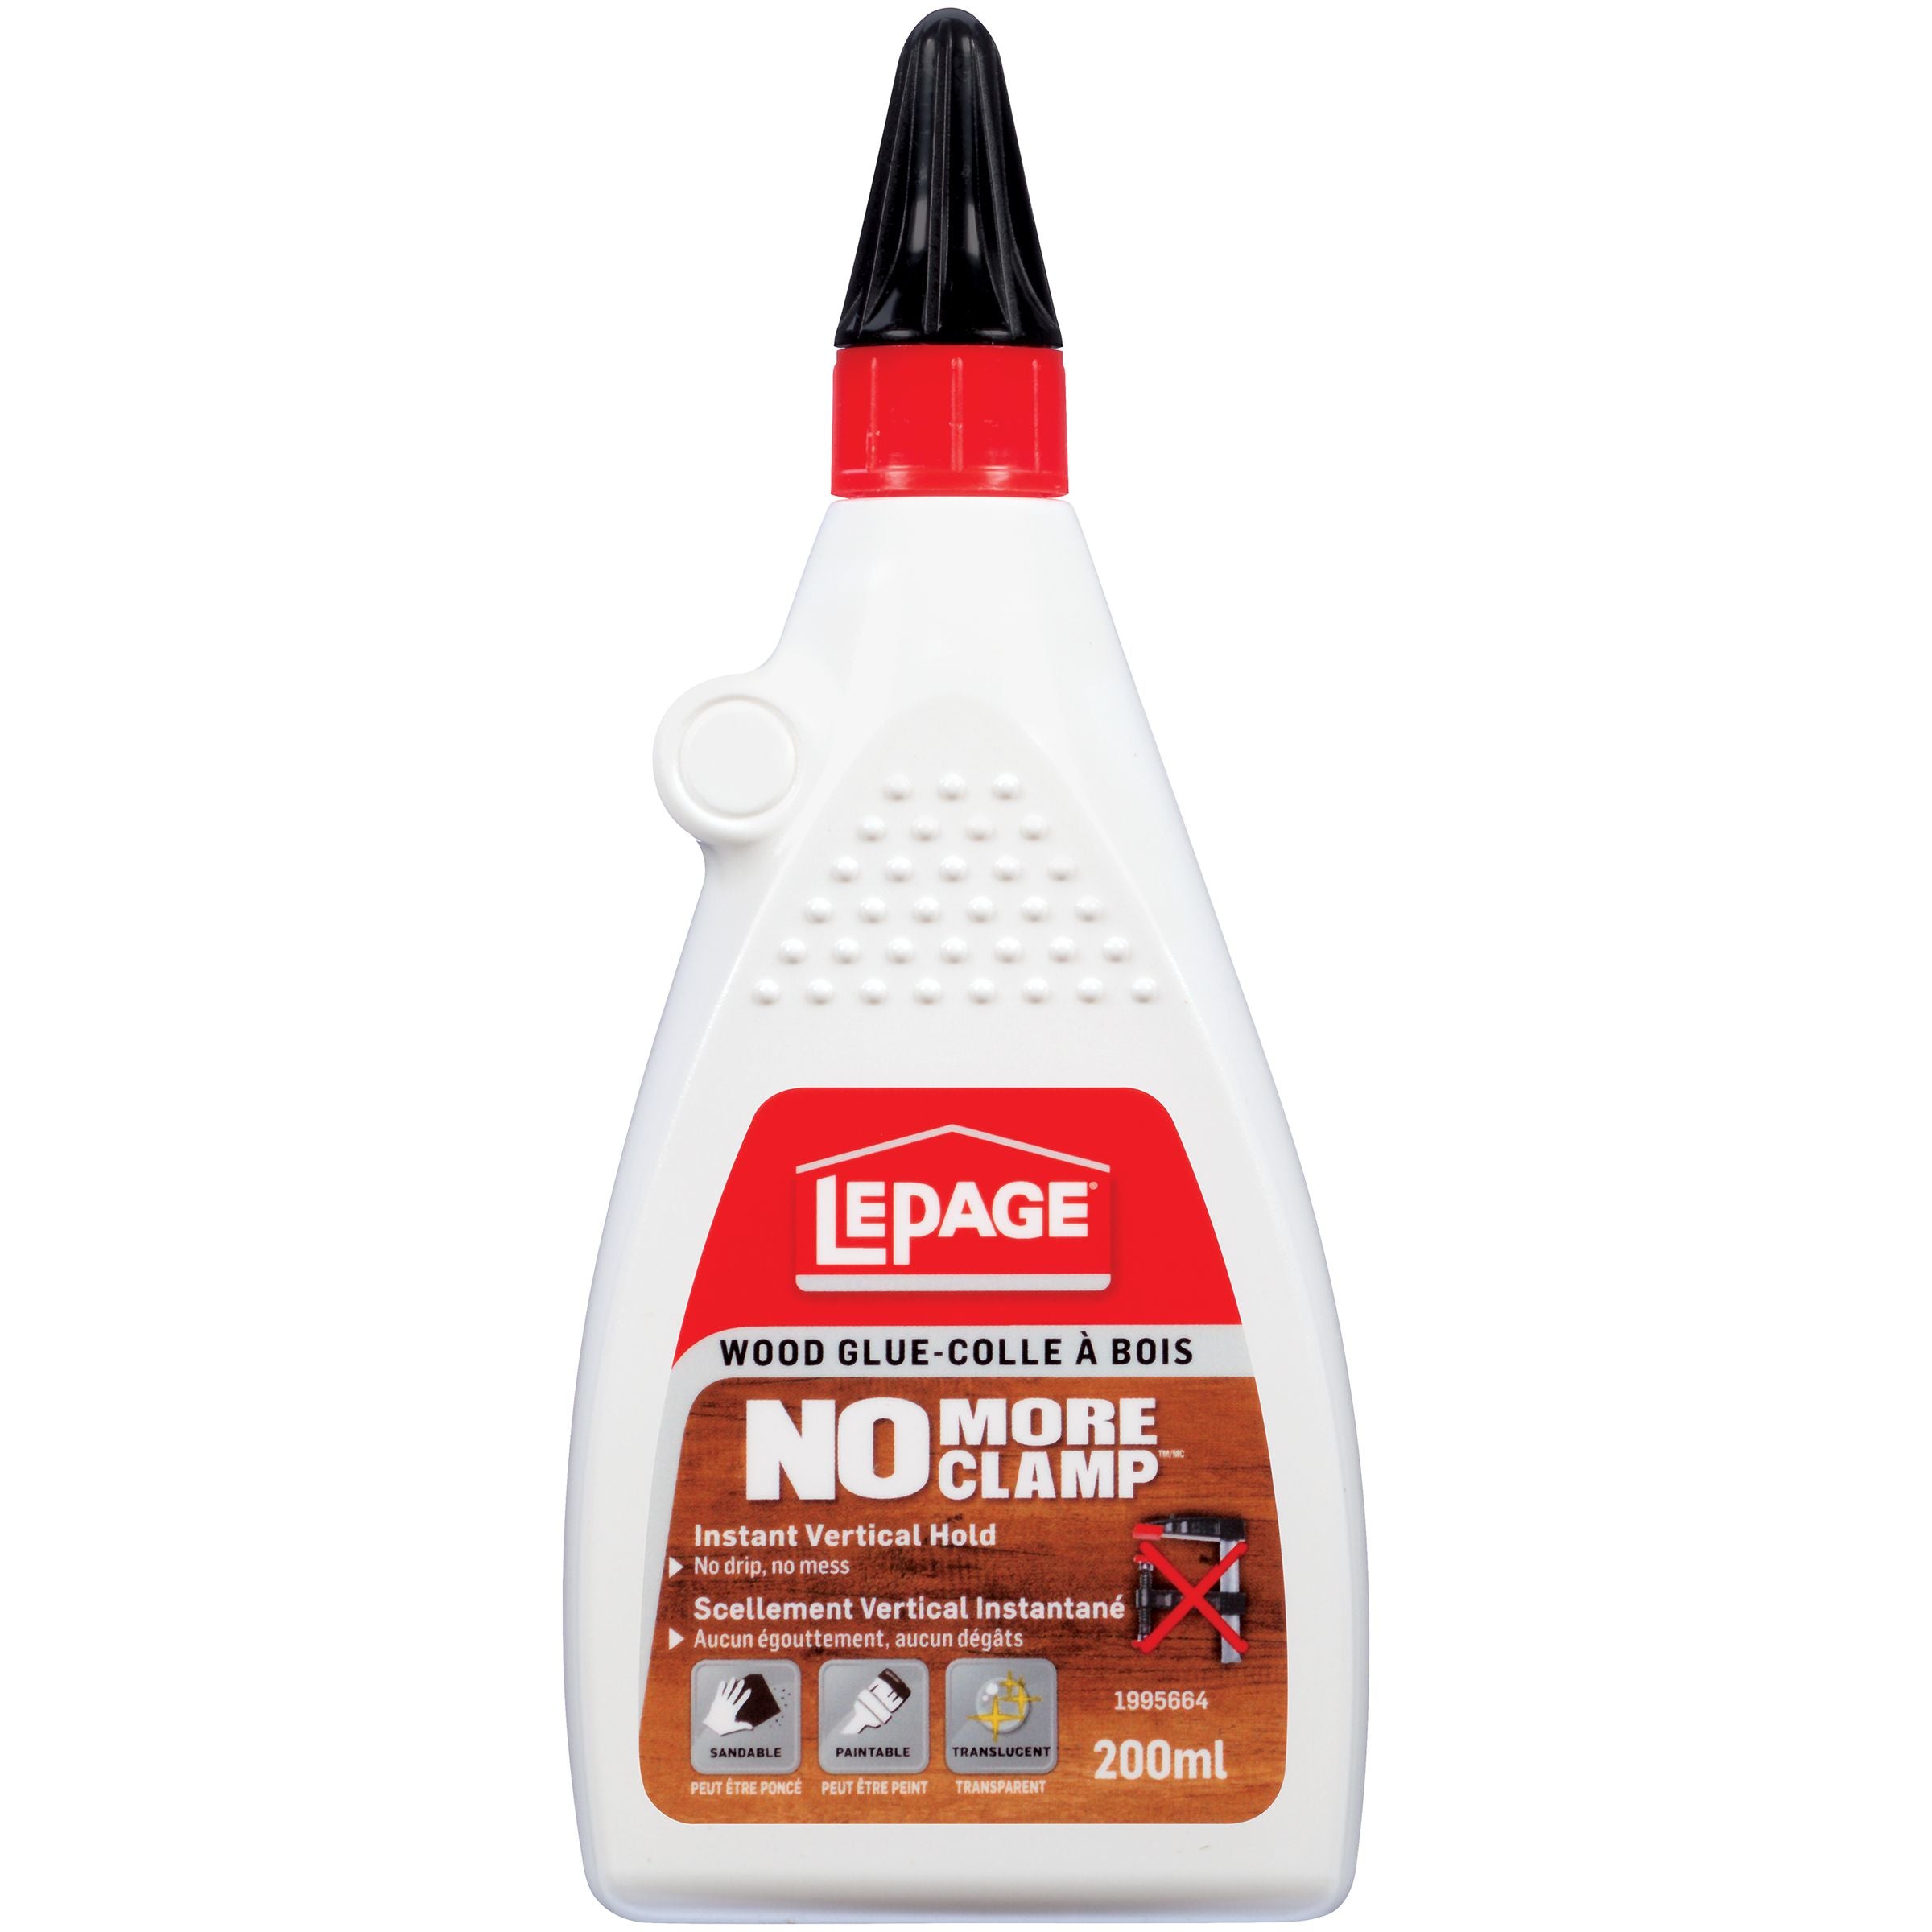 LePage No More Clamp Wood Glue 200ml, Clear